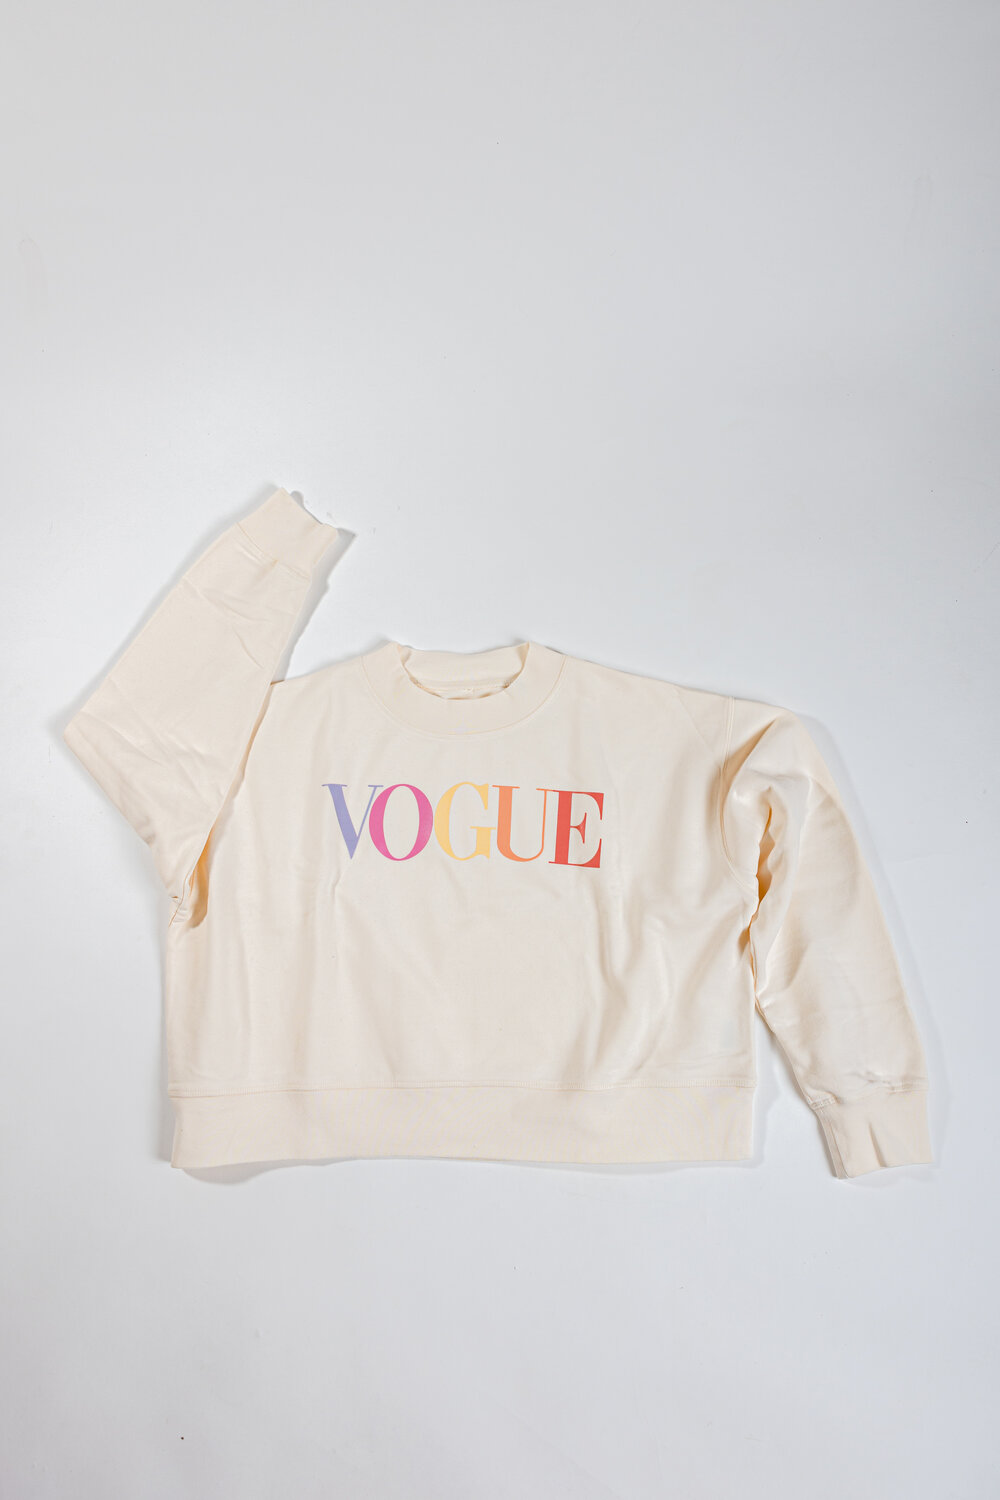 VOGUE Cropped Sweater, Gr. S